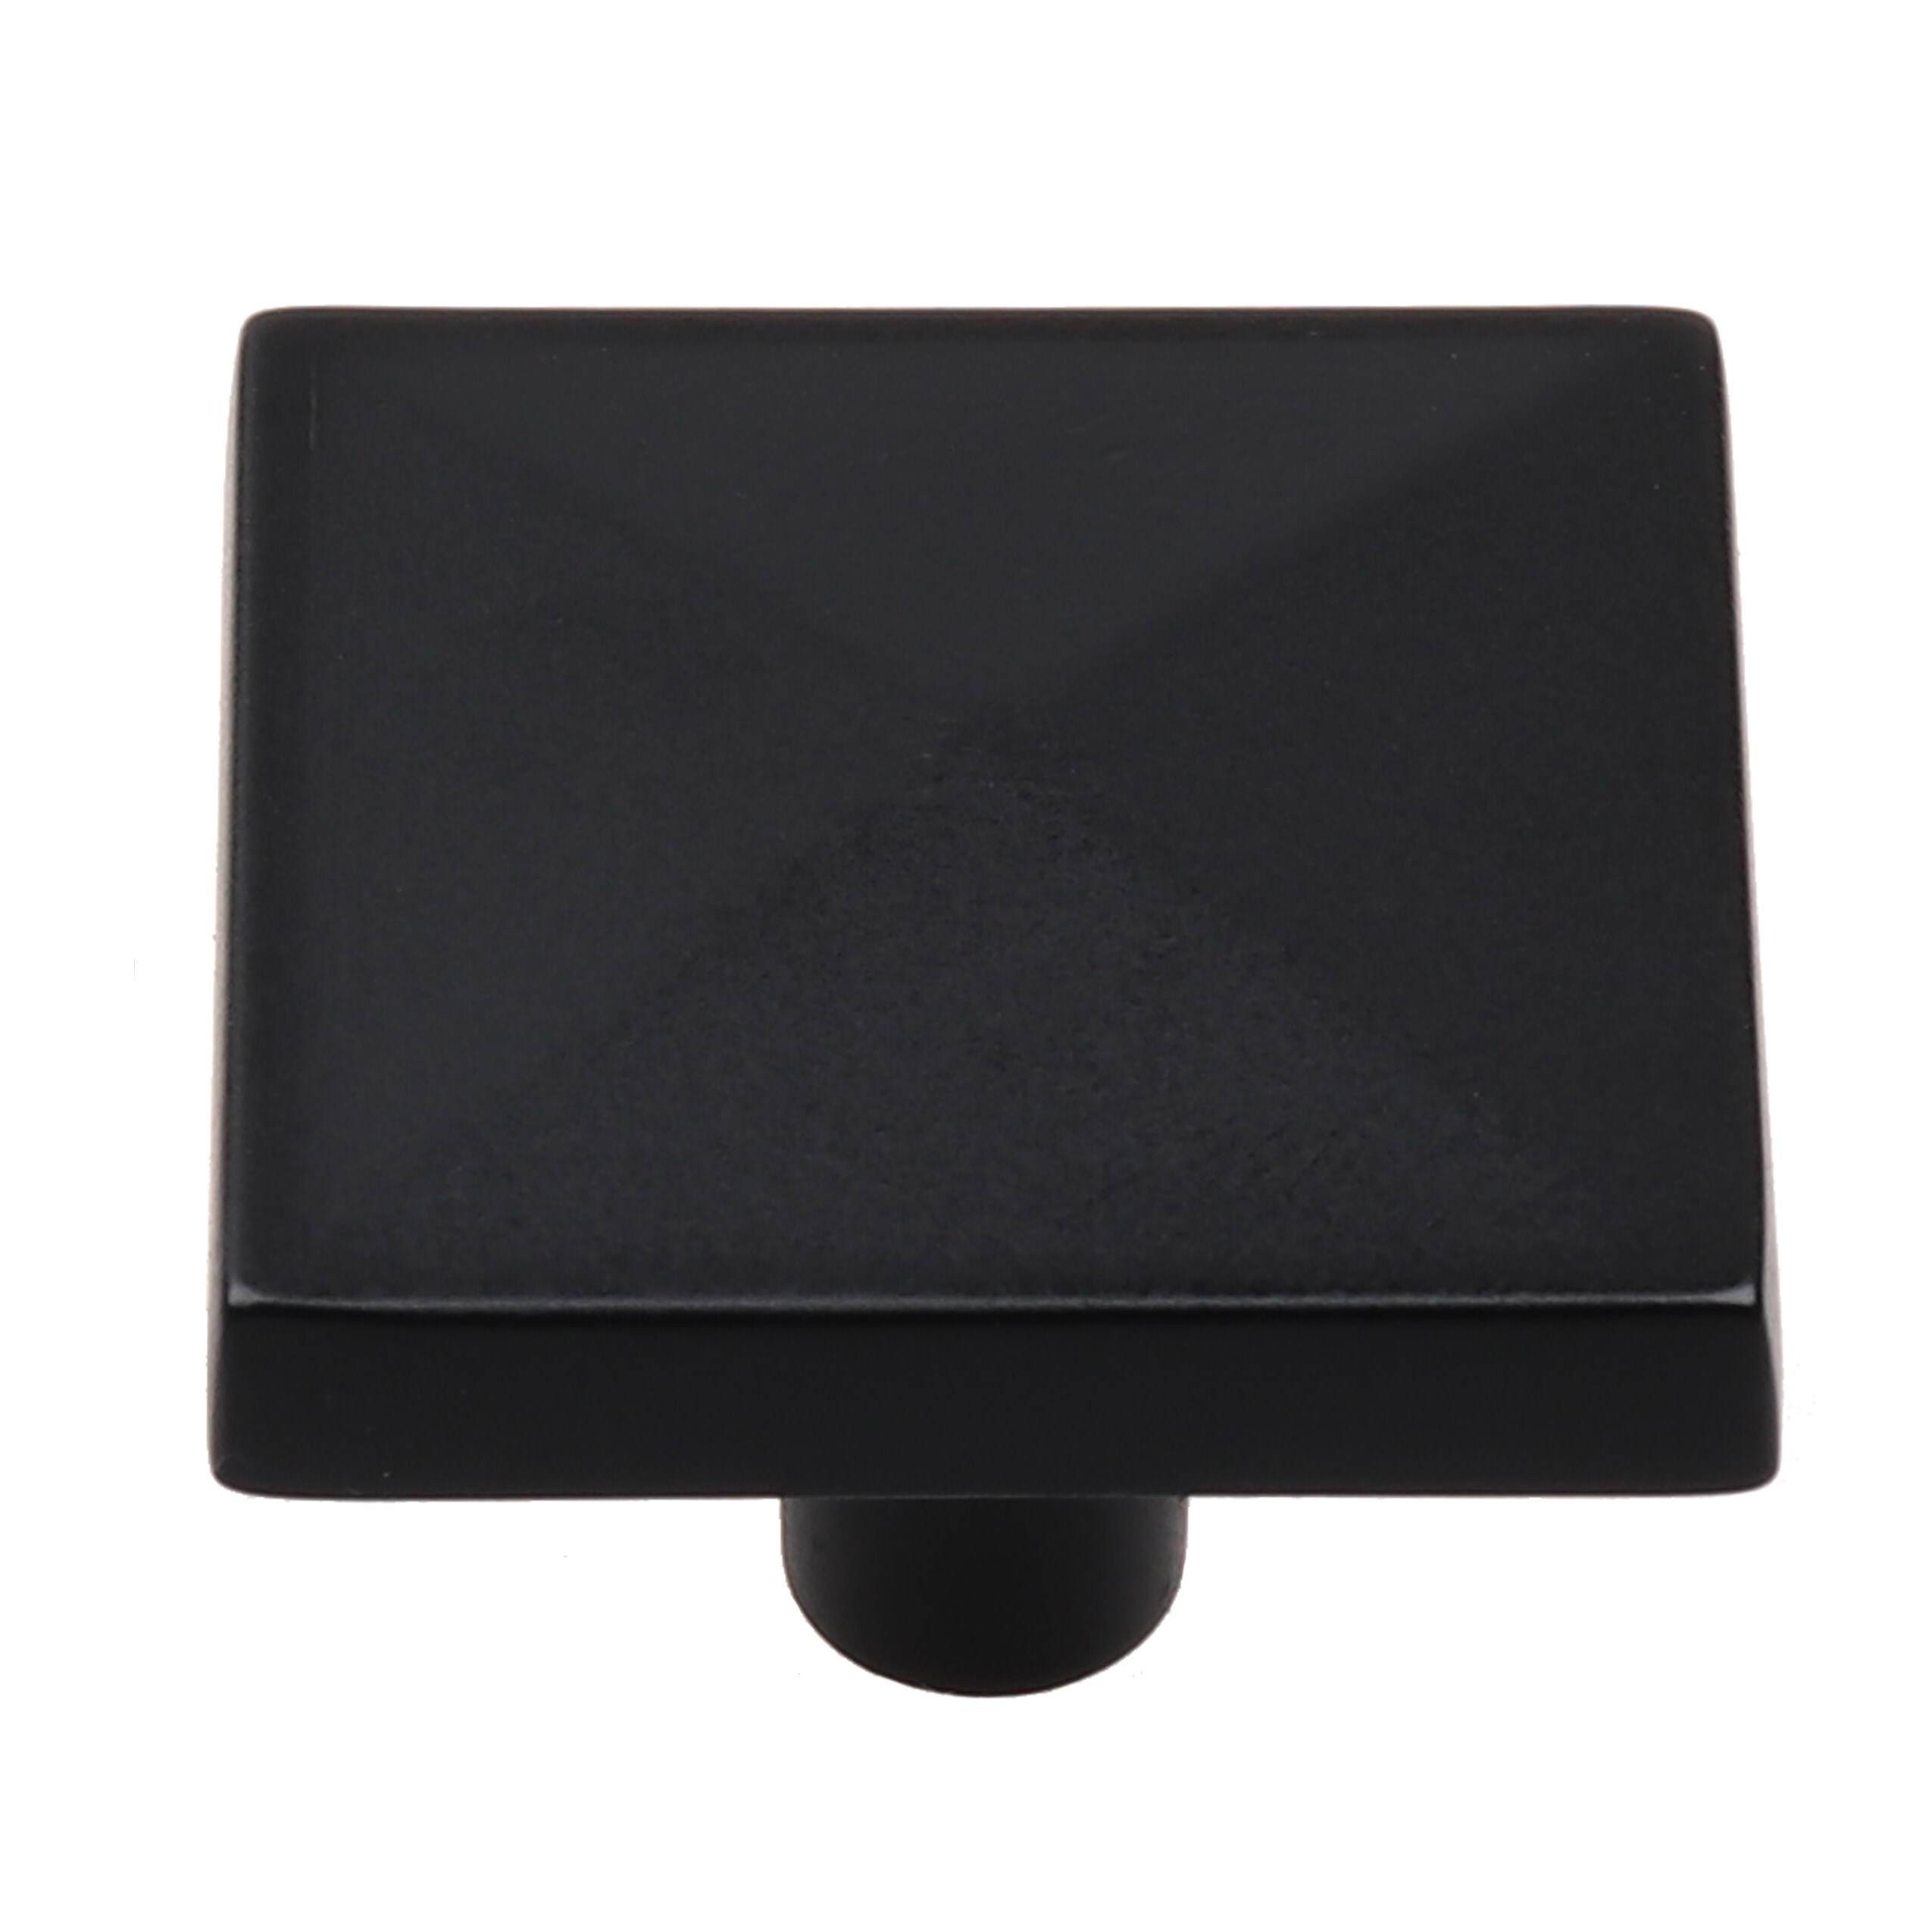 GlideRite 1-1/4 in. Classic Square Pyramid Cabinet Knobs, Matte Black, Pack of 5 - image 1 of 4